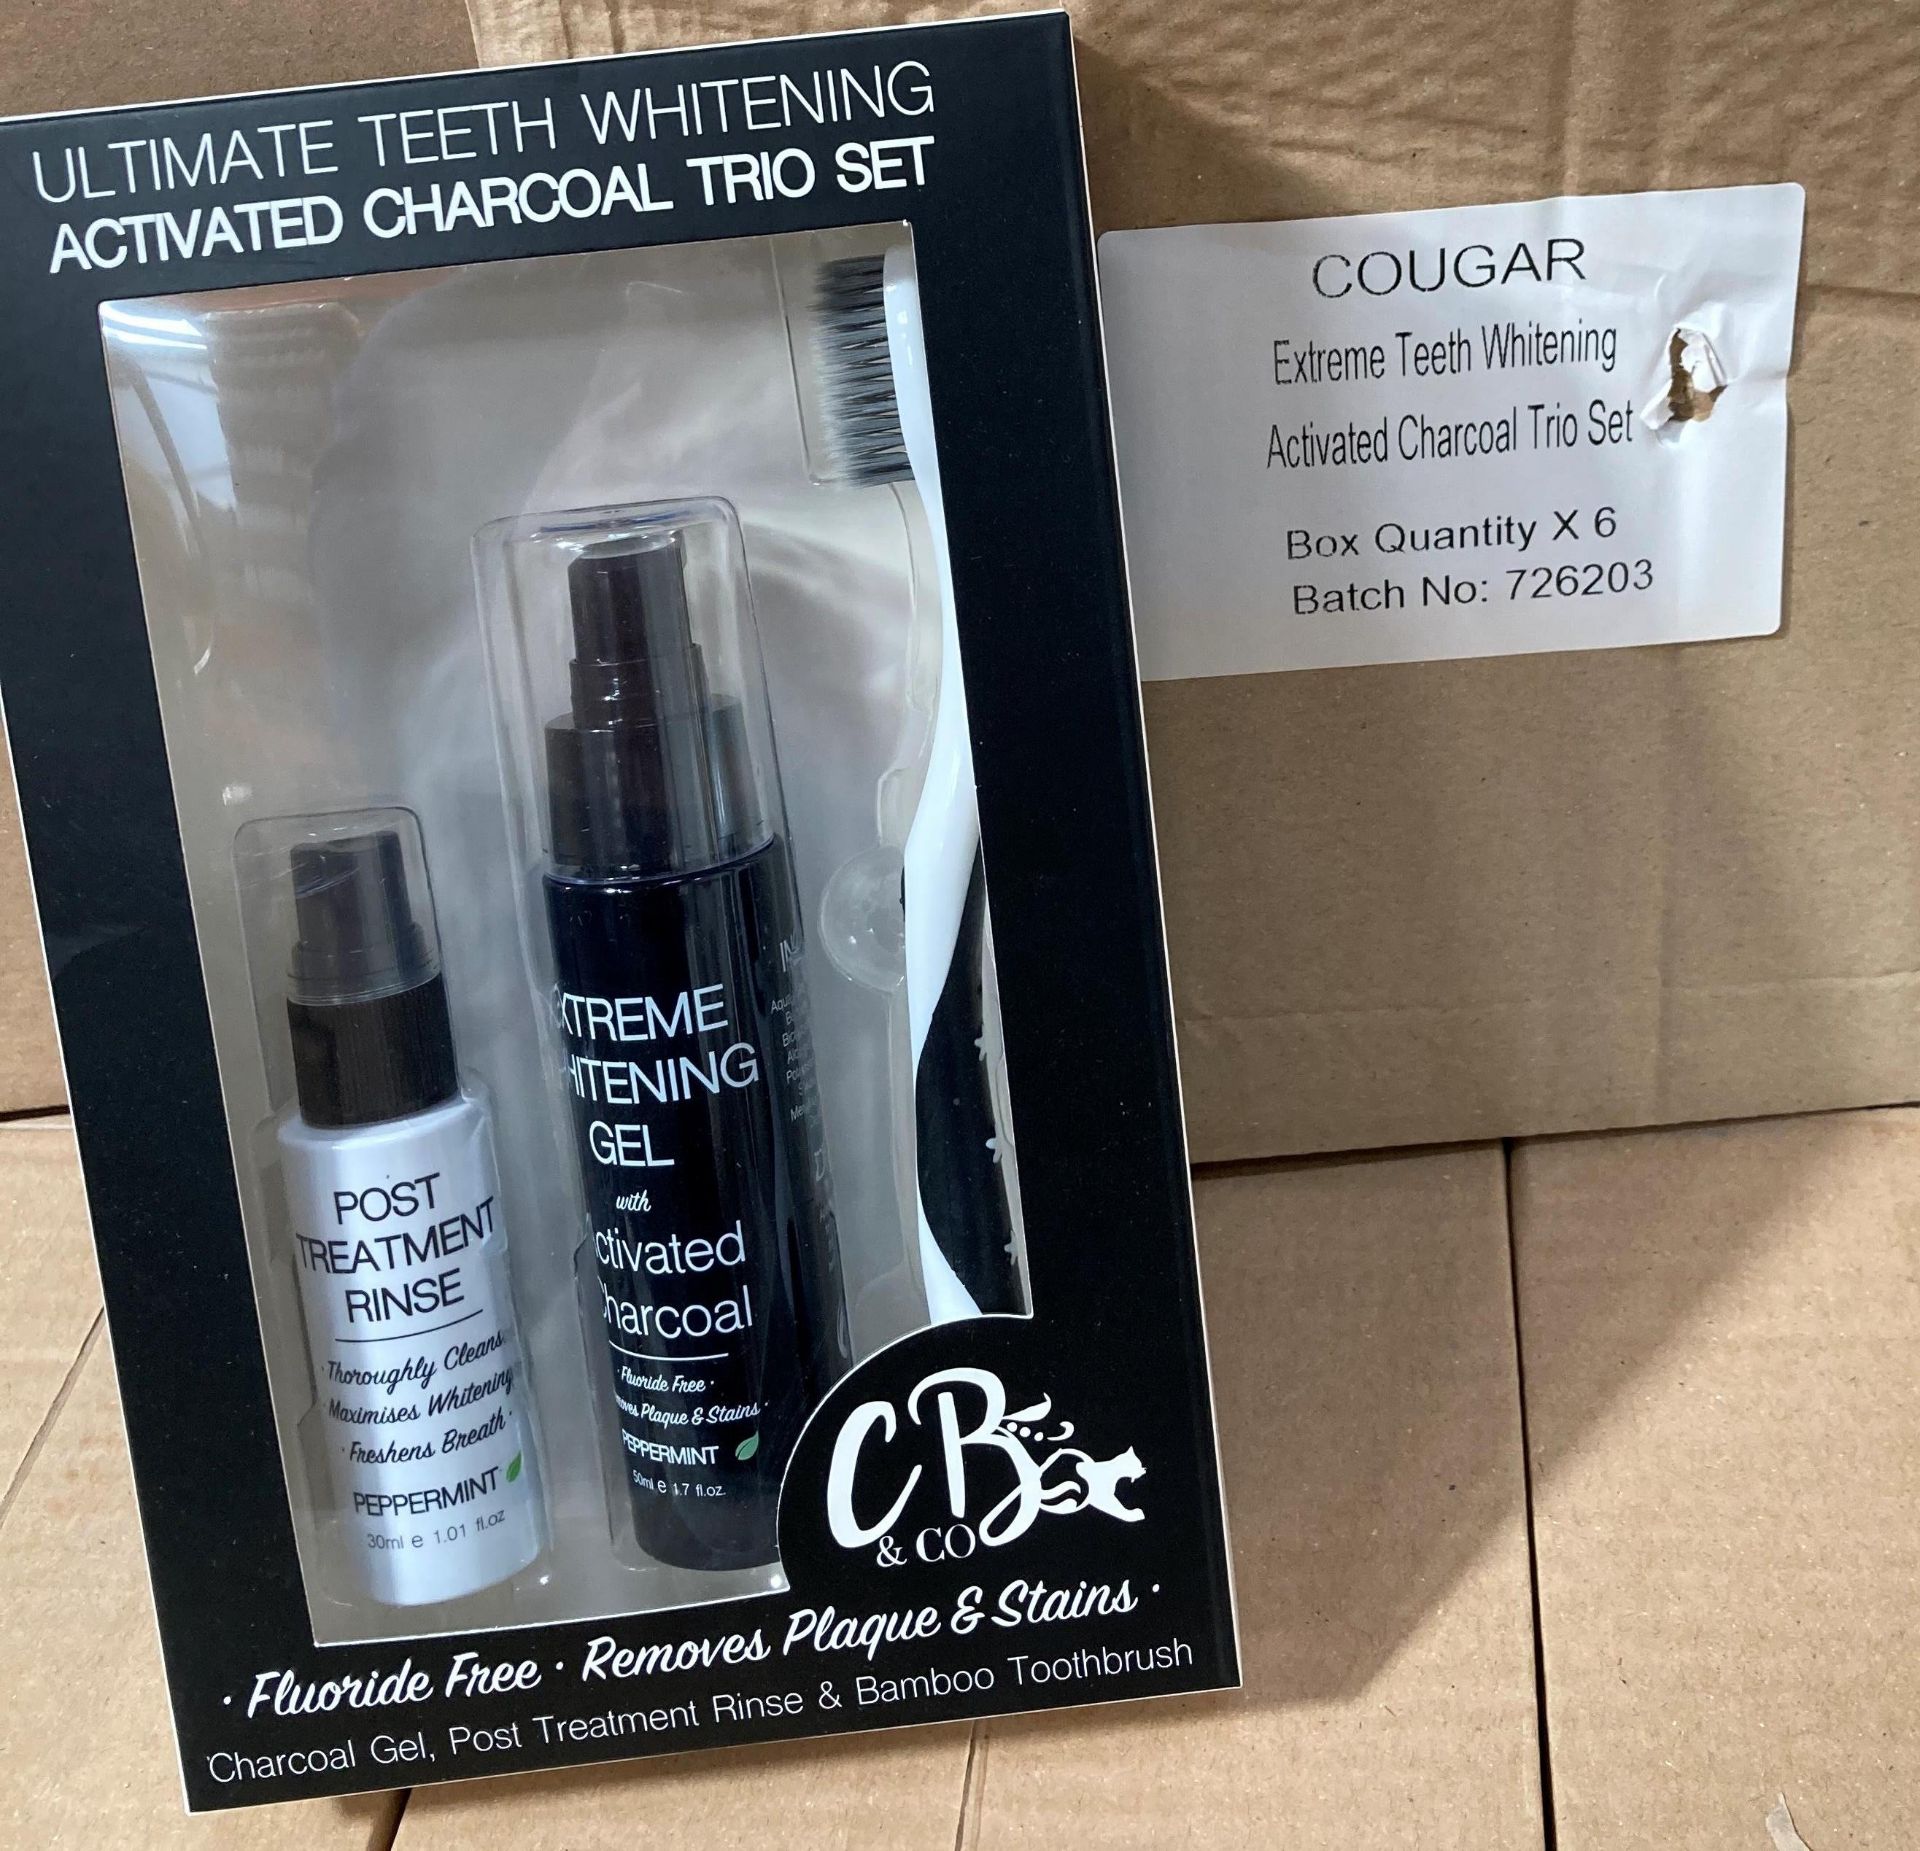 2 x boxes of Cougar Extreme Teeth Whitening Activated Charcoal trio sets (6 units per box)